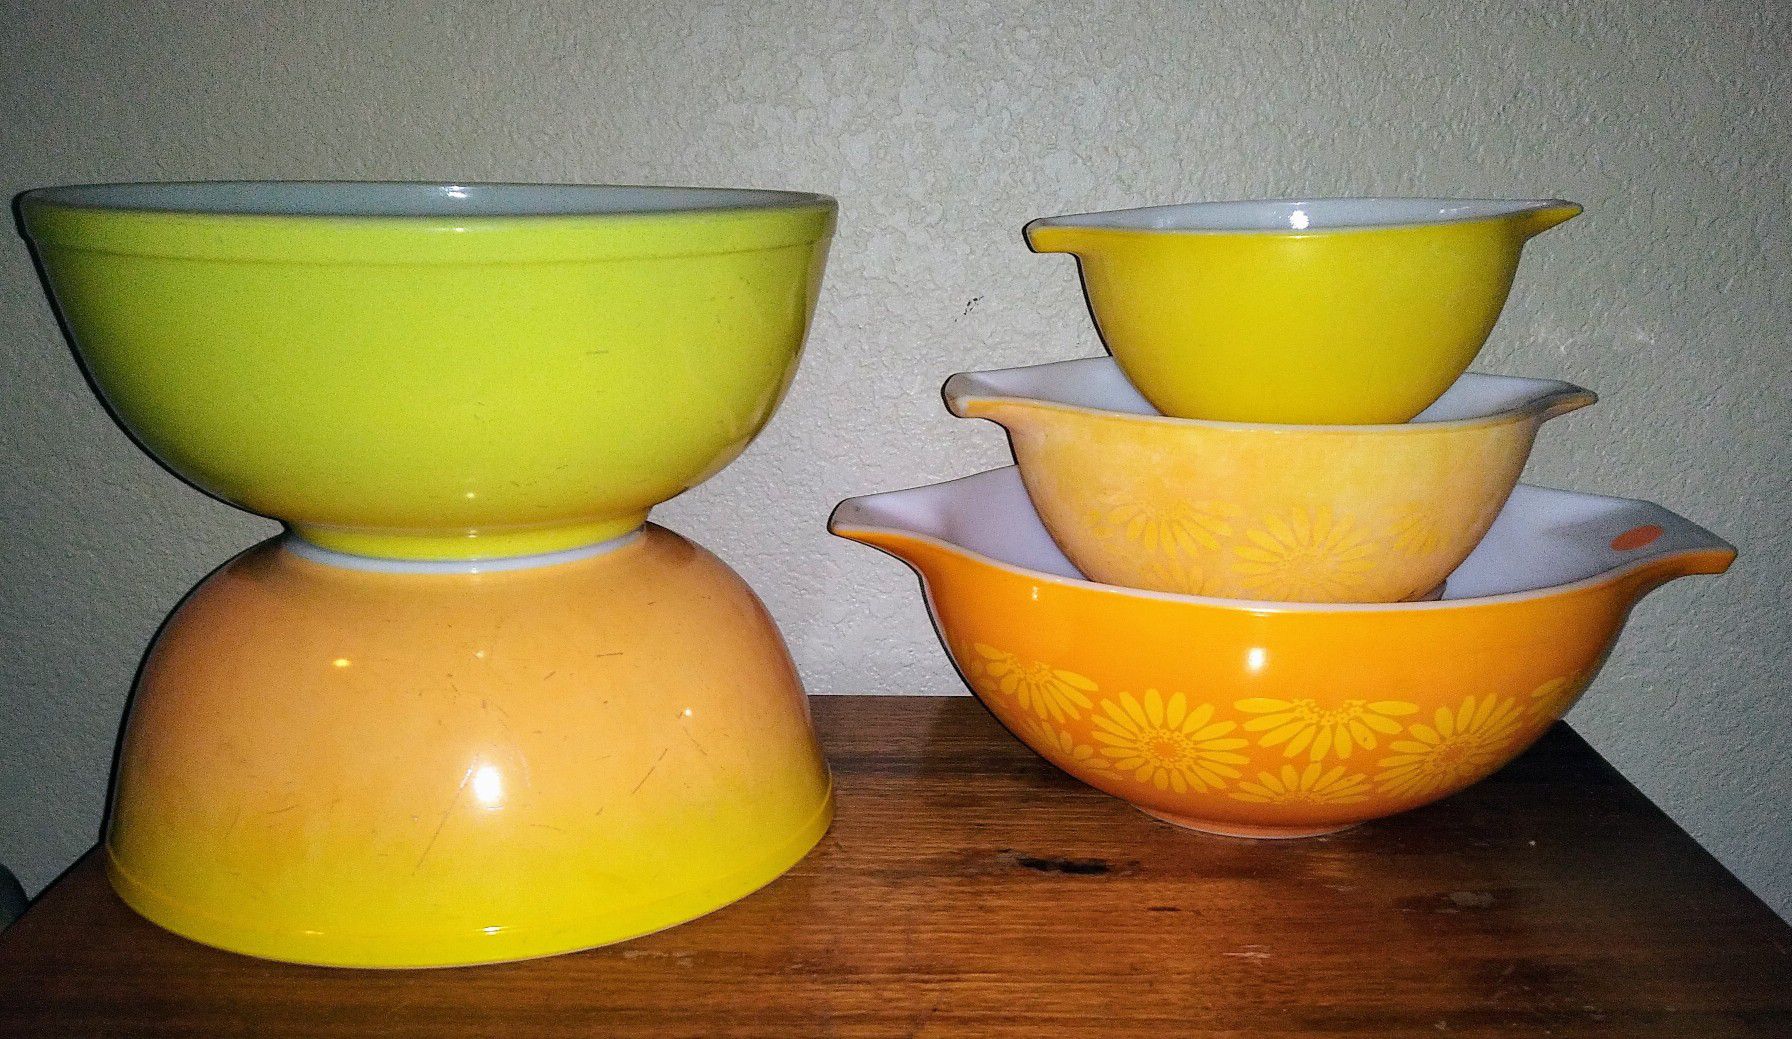 Vintage Pyrex lot.... There's quit a bit of ware on these bowls. Please see the provided pictures.